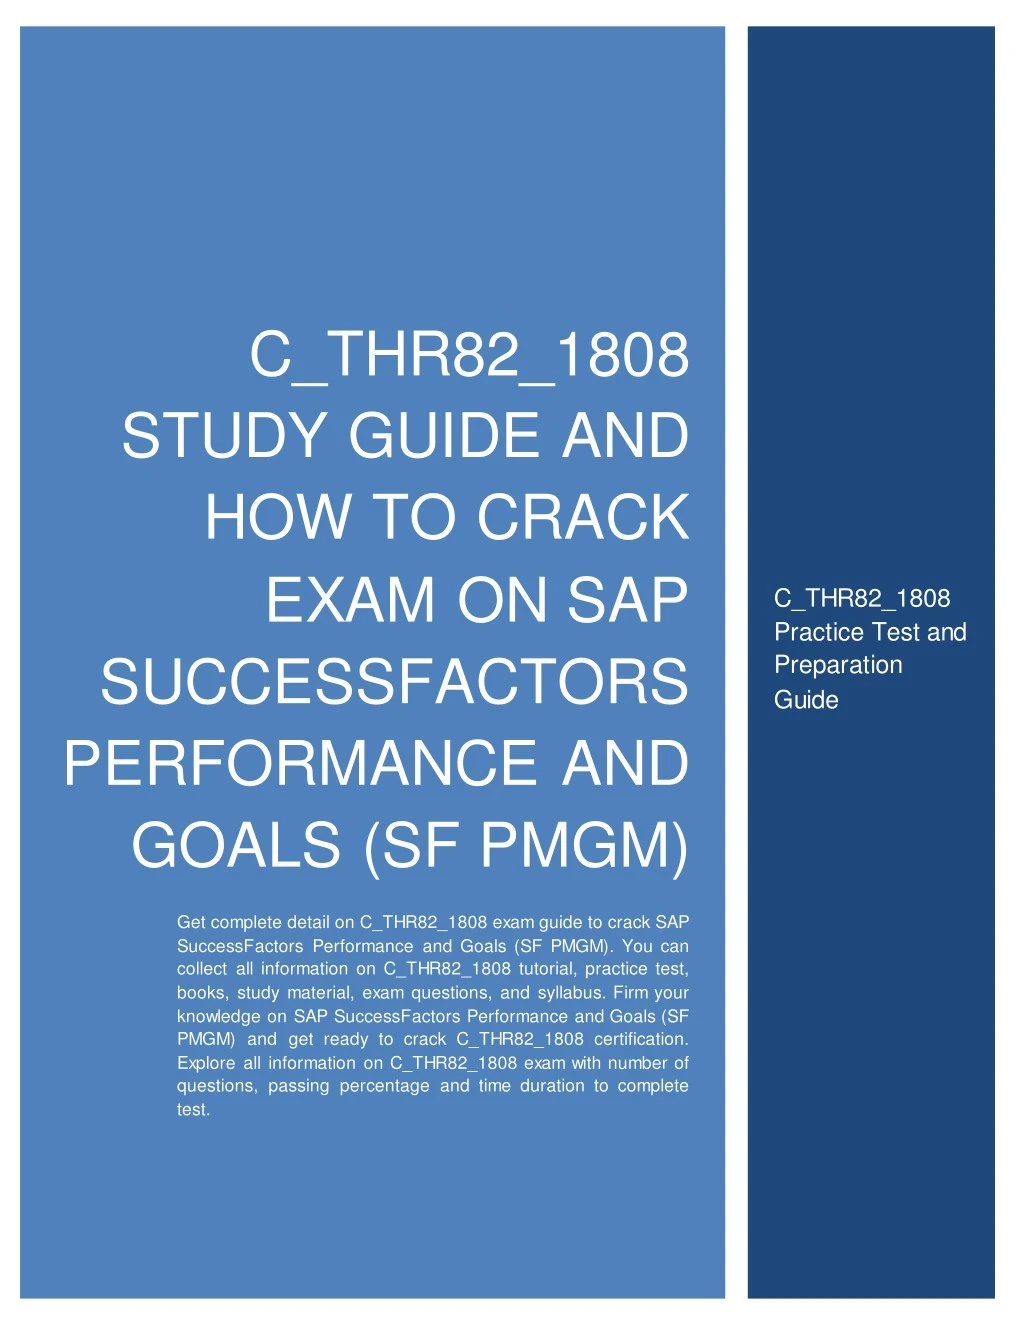 c thr82 1808 study guide and how to crack exam